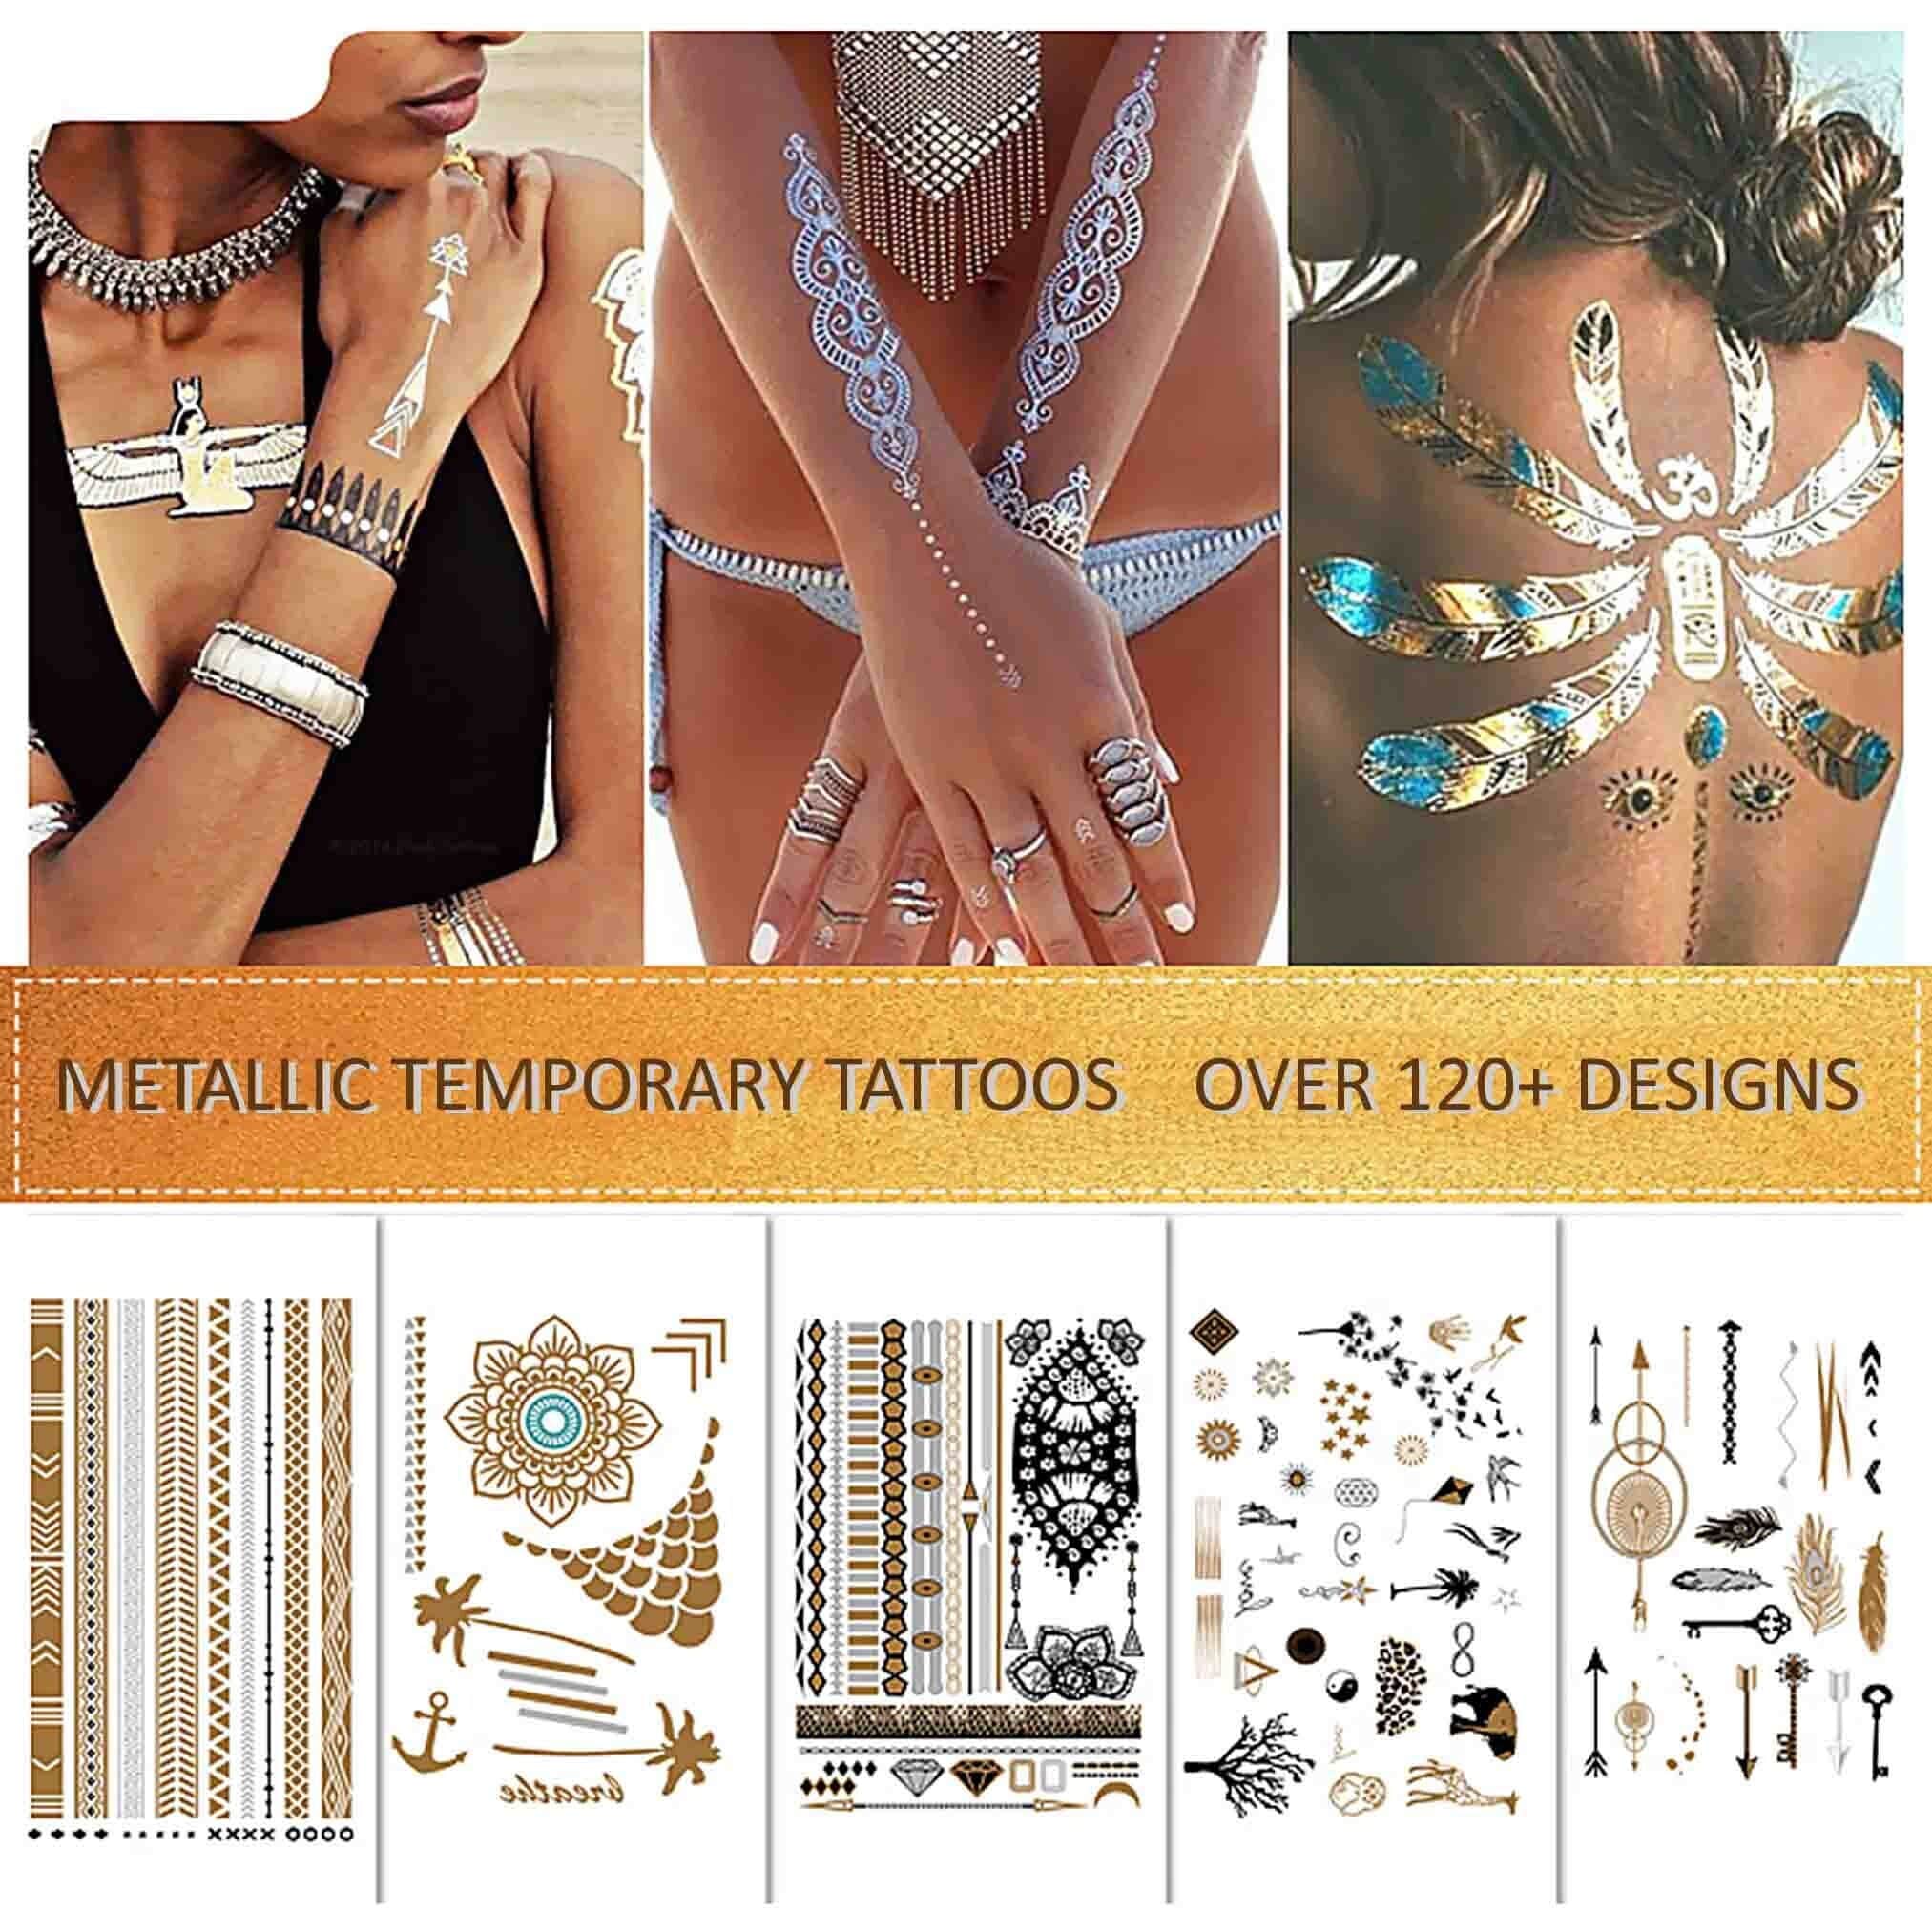 Custom Metallic Temporary Tattoos - Instant Quote - Made by Cooper